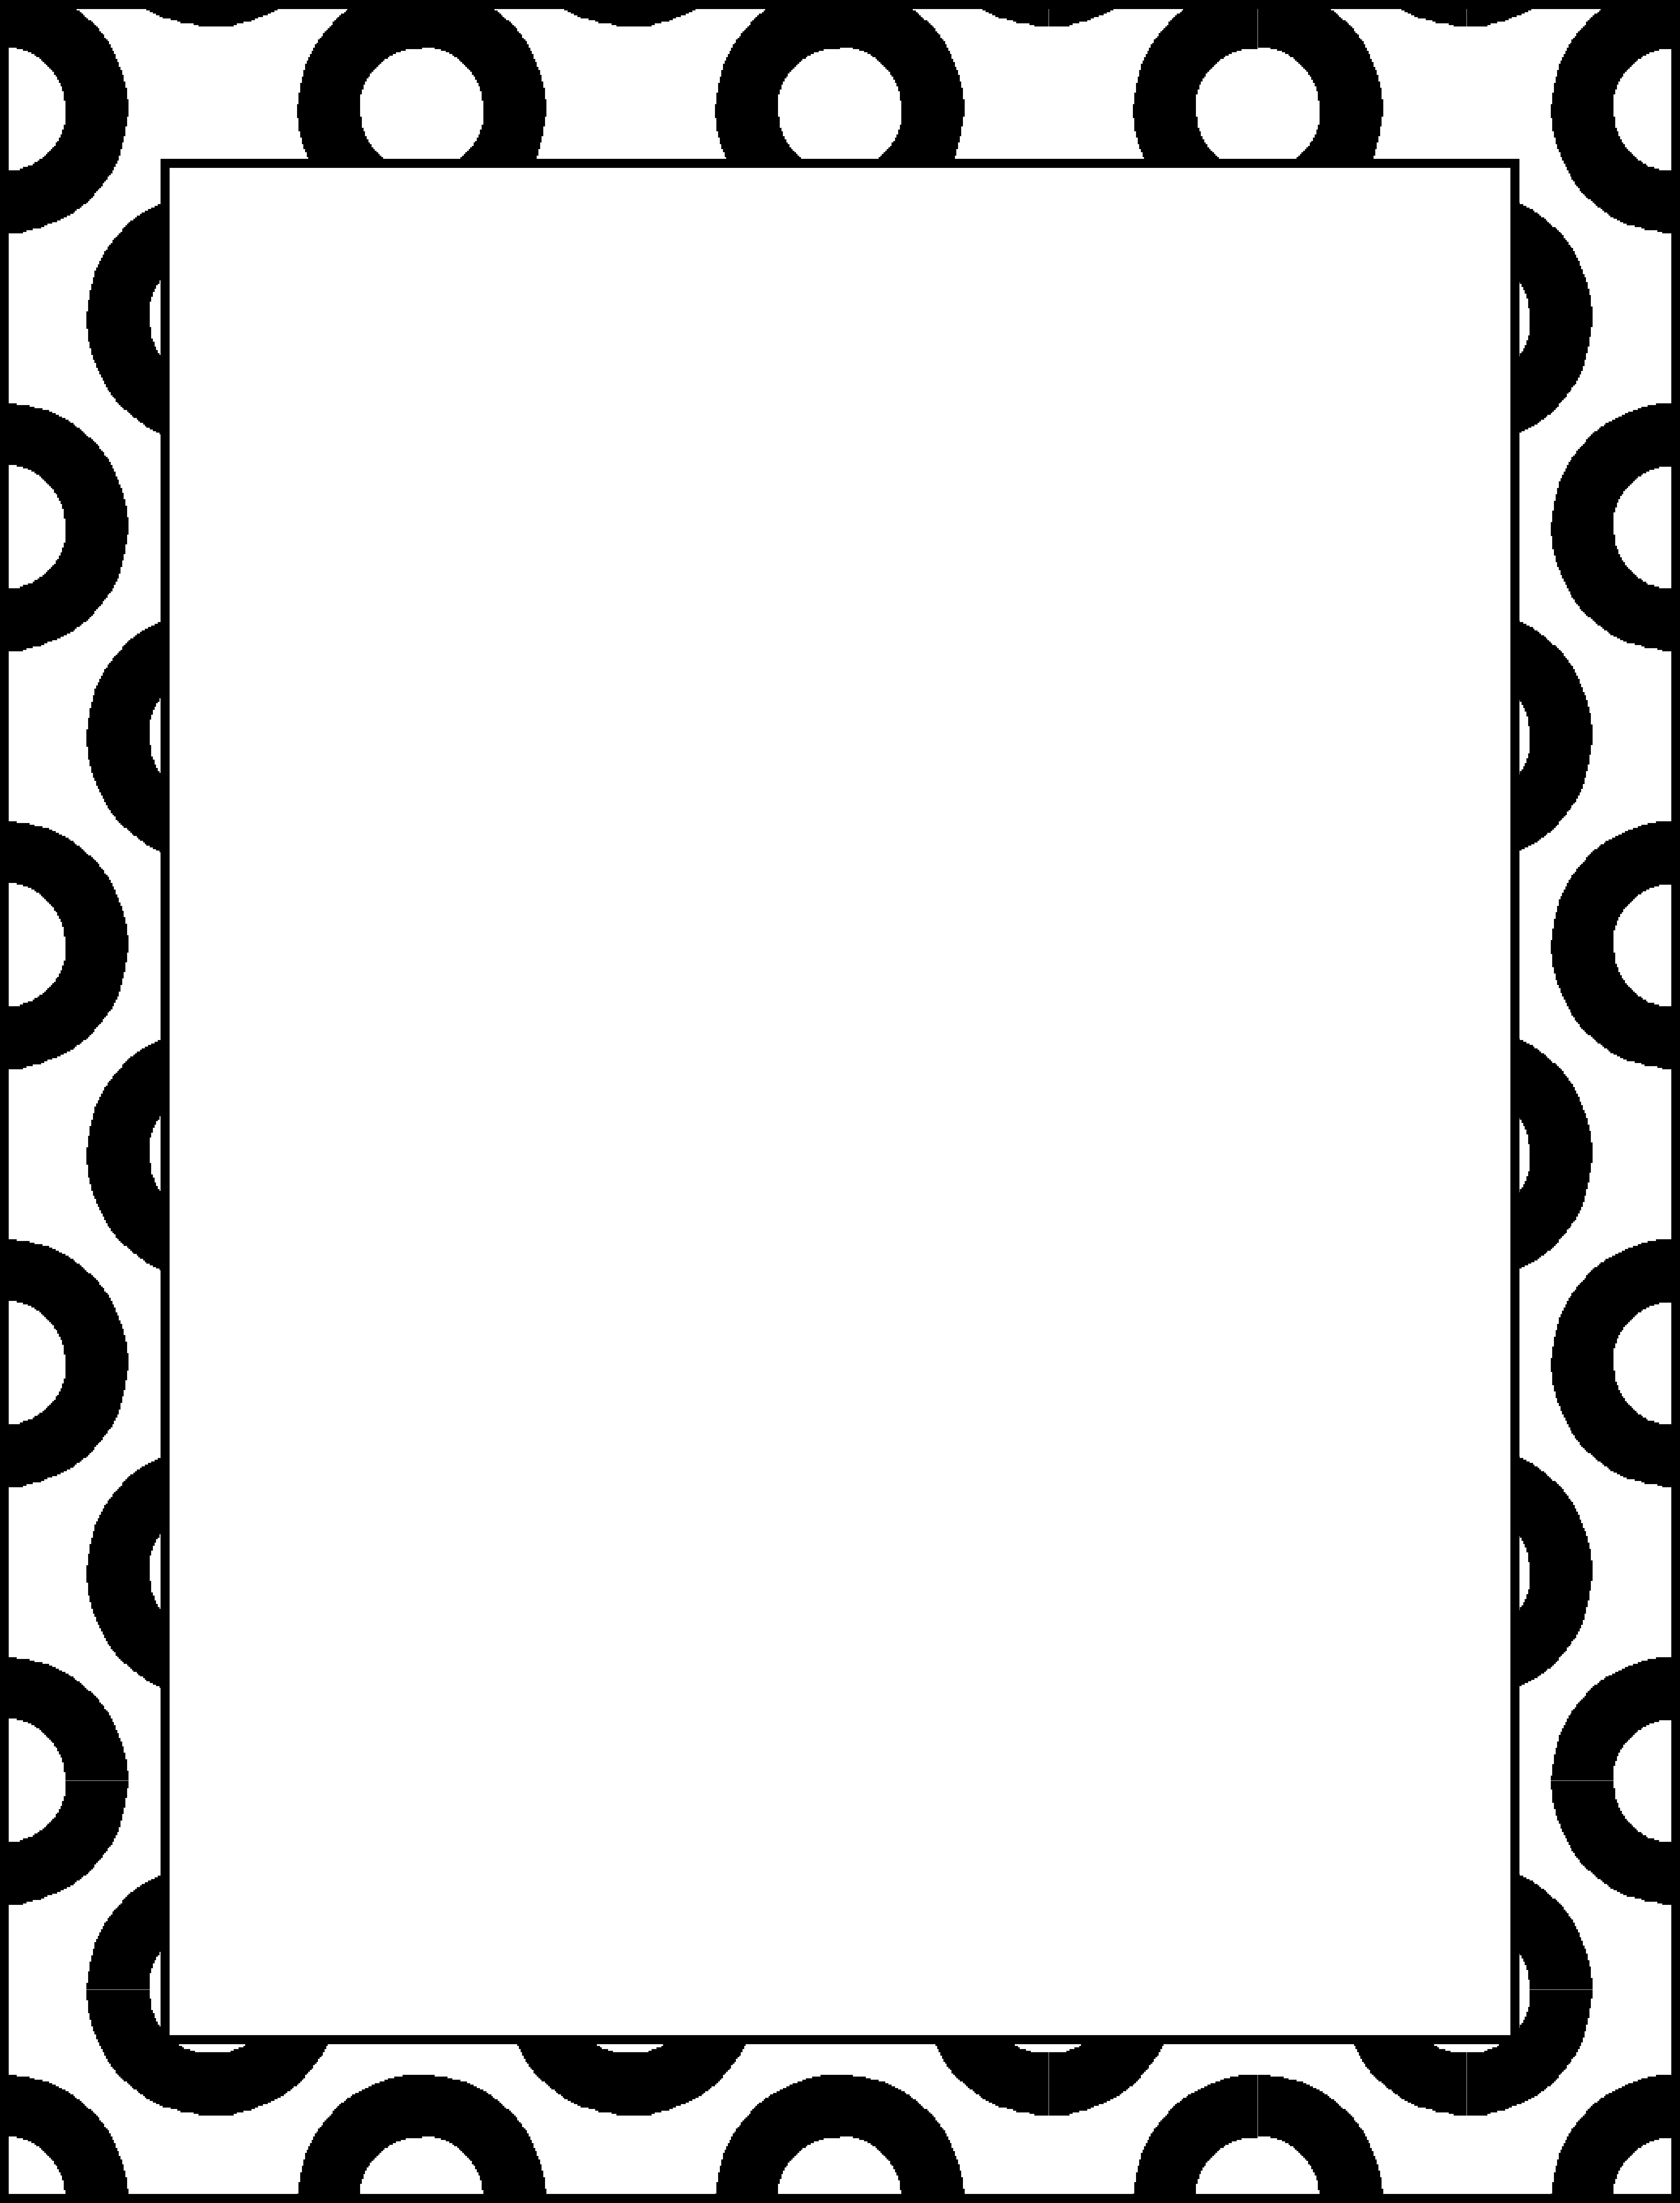 Borders For Invitations Free - ClipArt Best